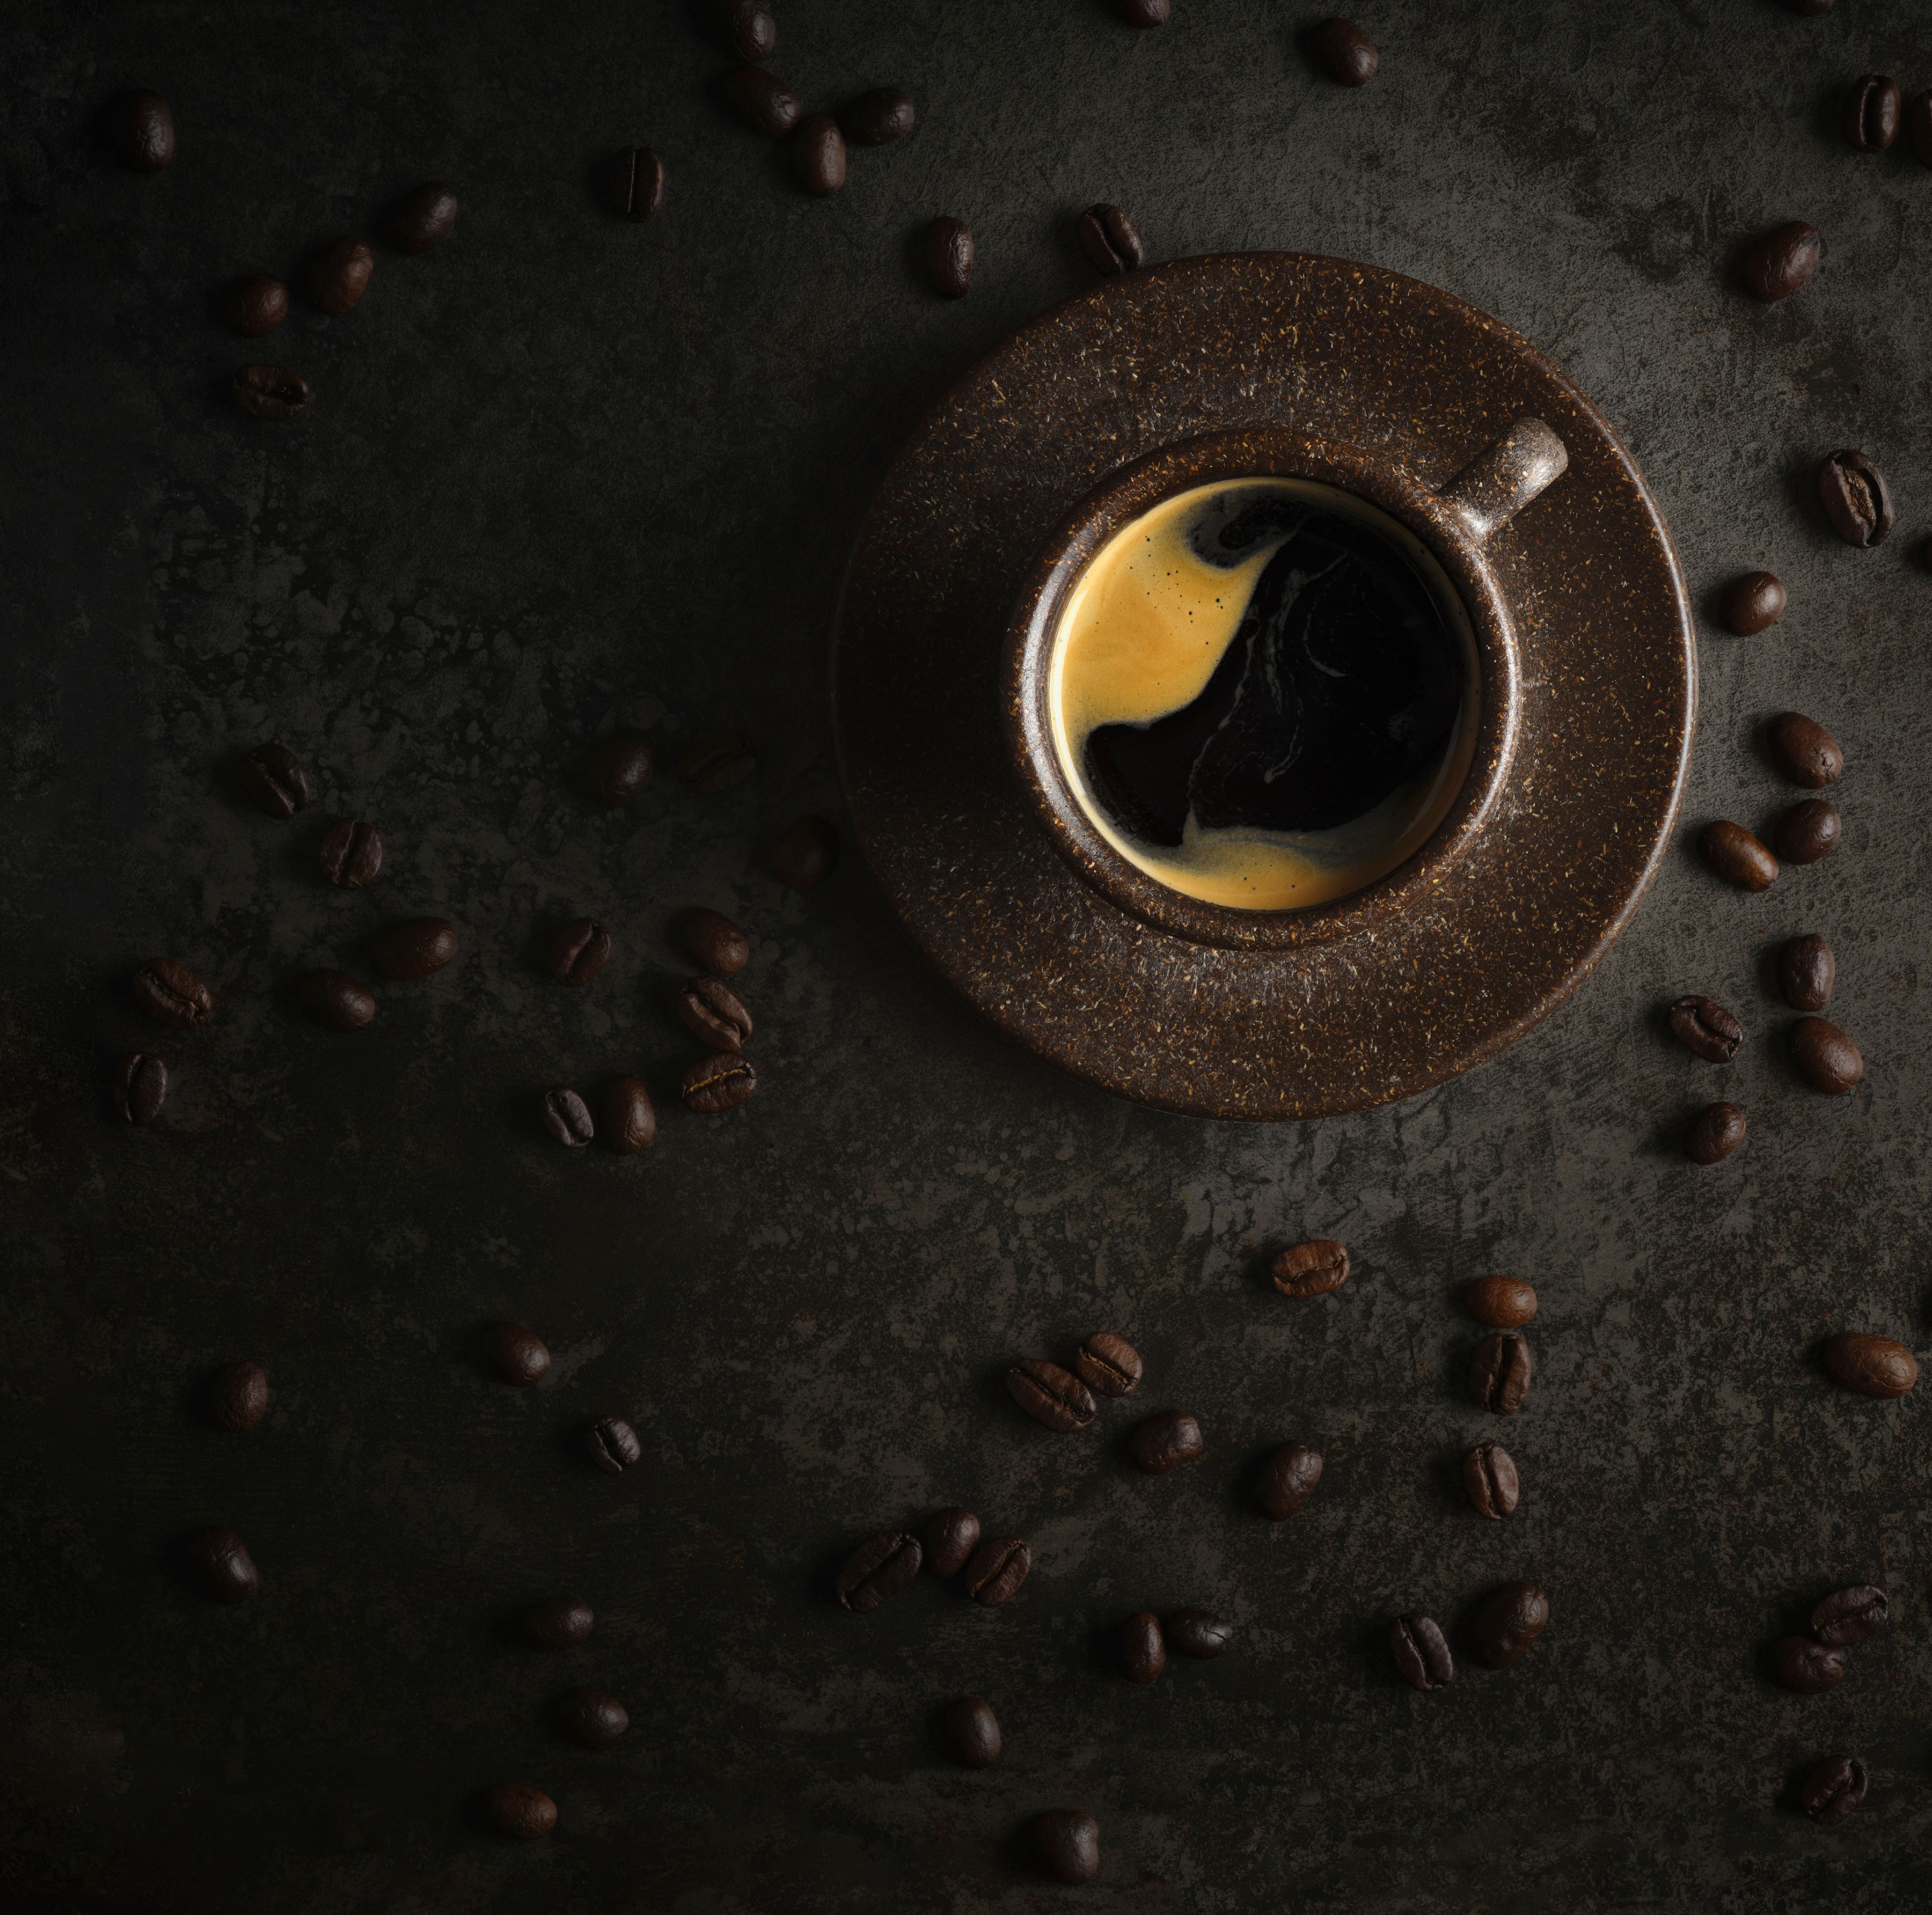 Overhead image of black coffee with whole beans in the background